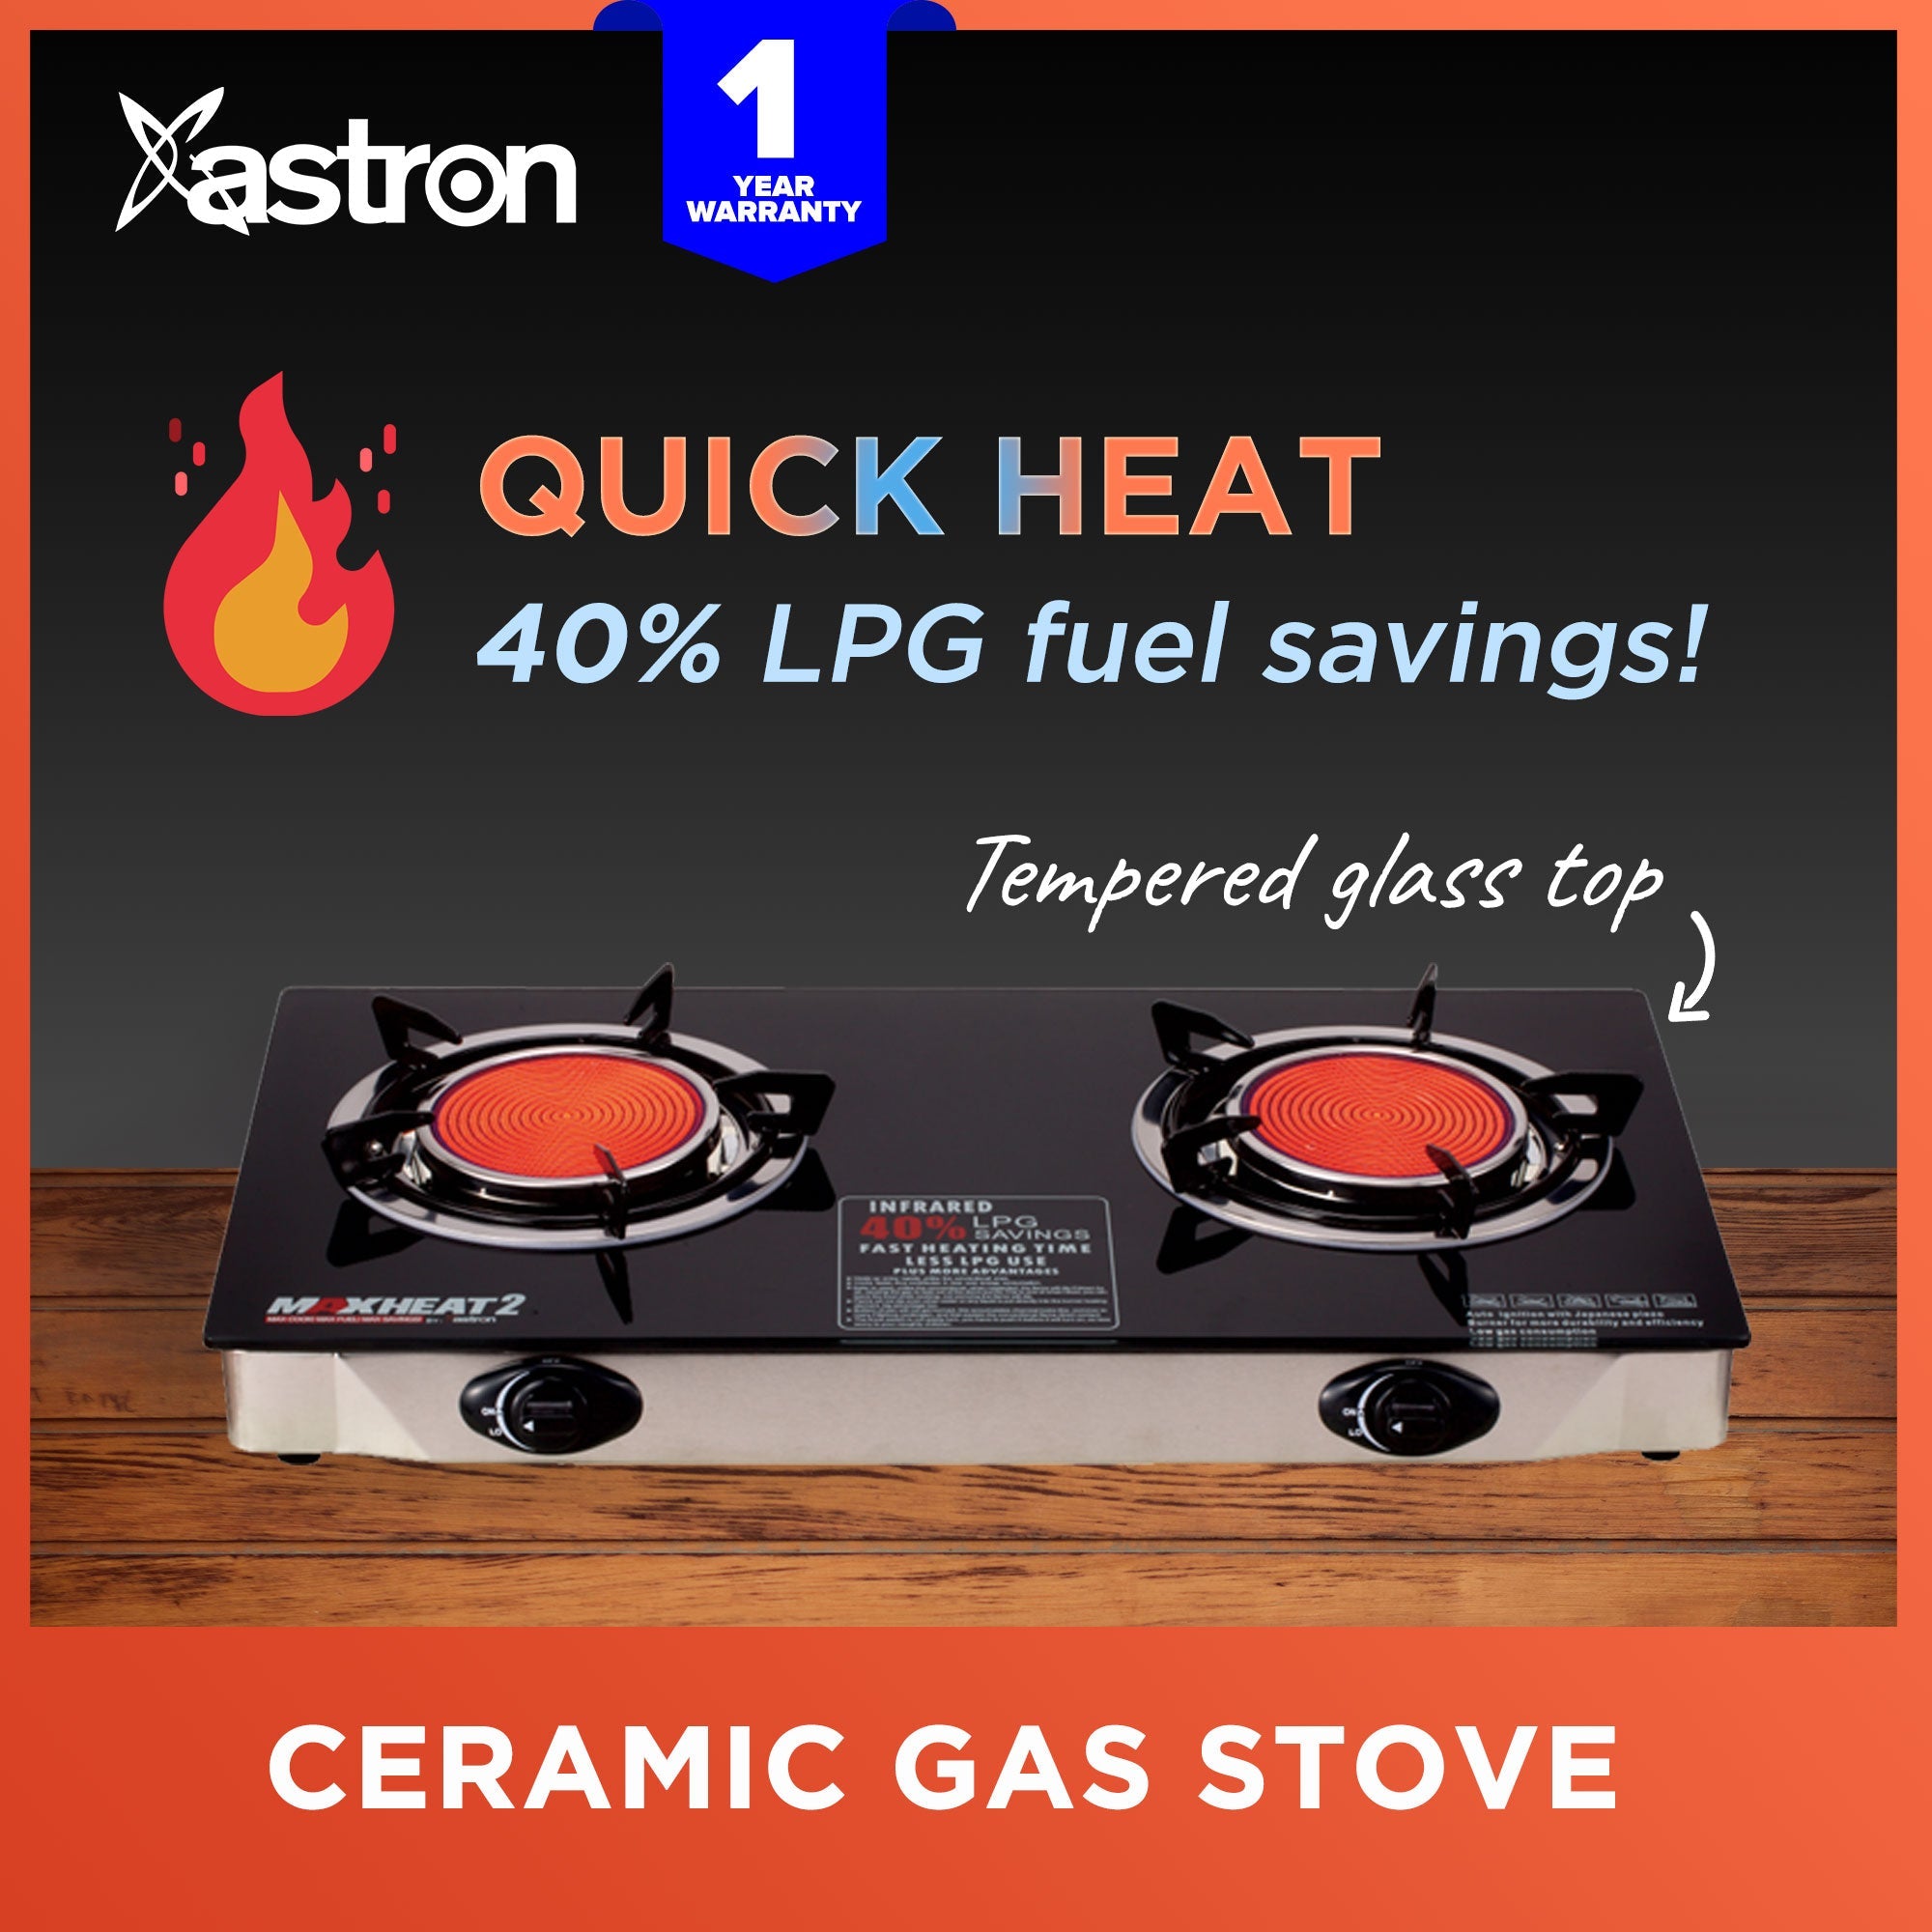 ASTRON MAXHEAT2 Double Burner Ceramic Gas Stove with Tempered Glass Top Infrared Burner Astron